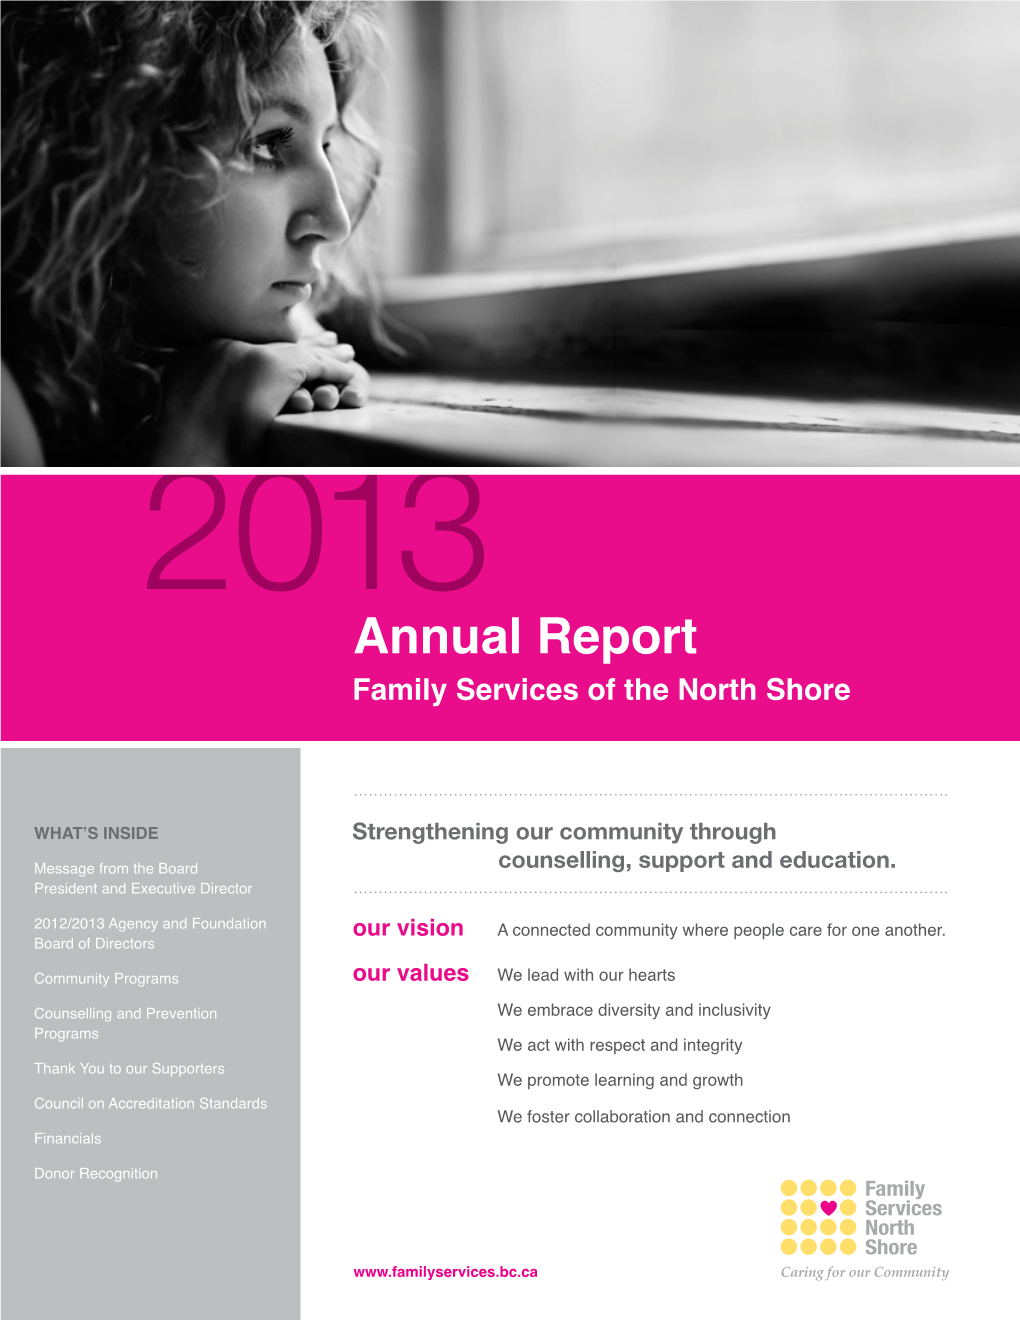 Annual Report Family Services of the North Shore